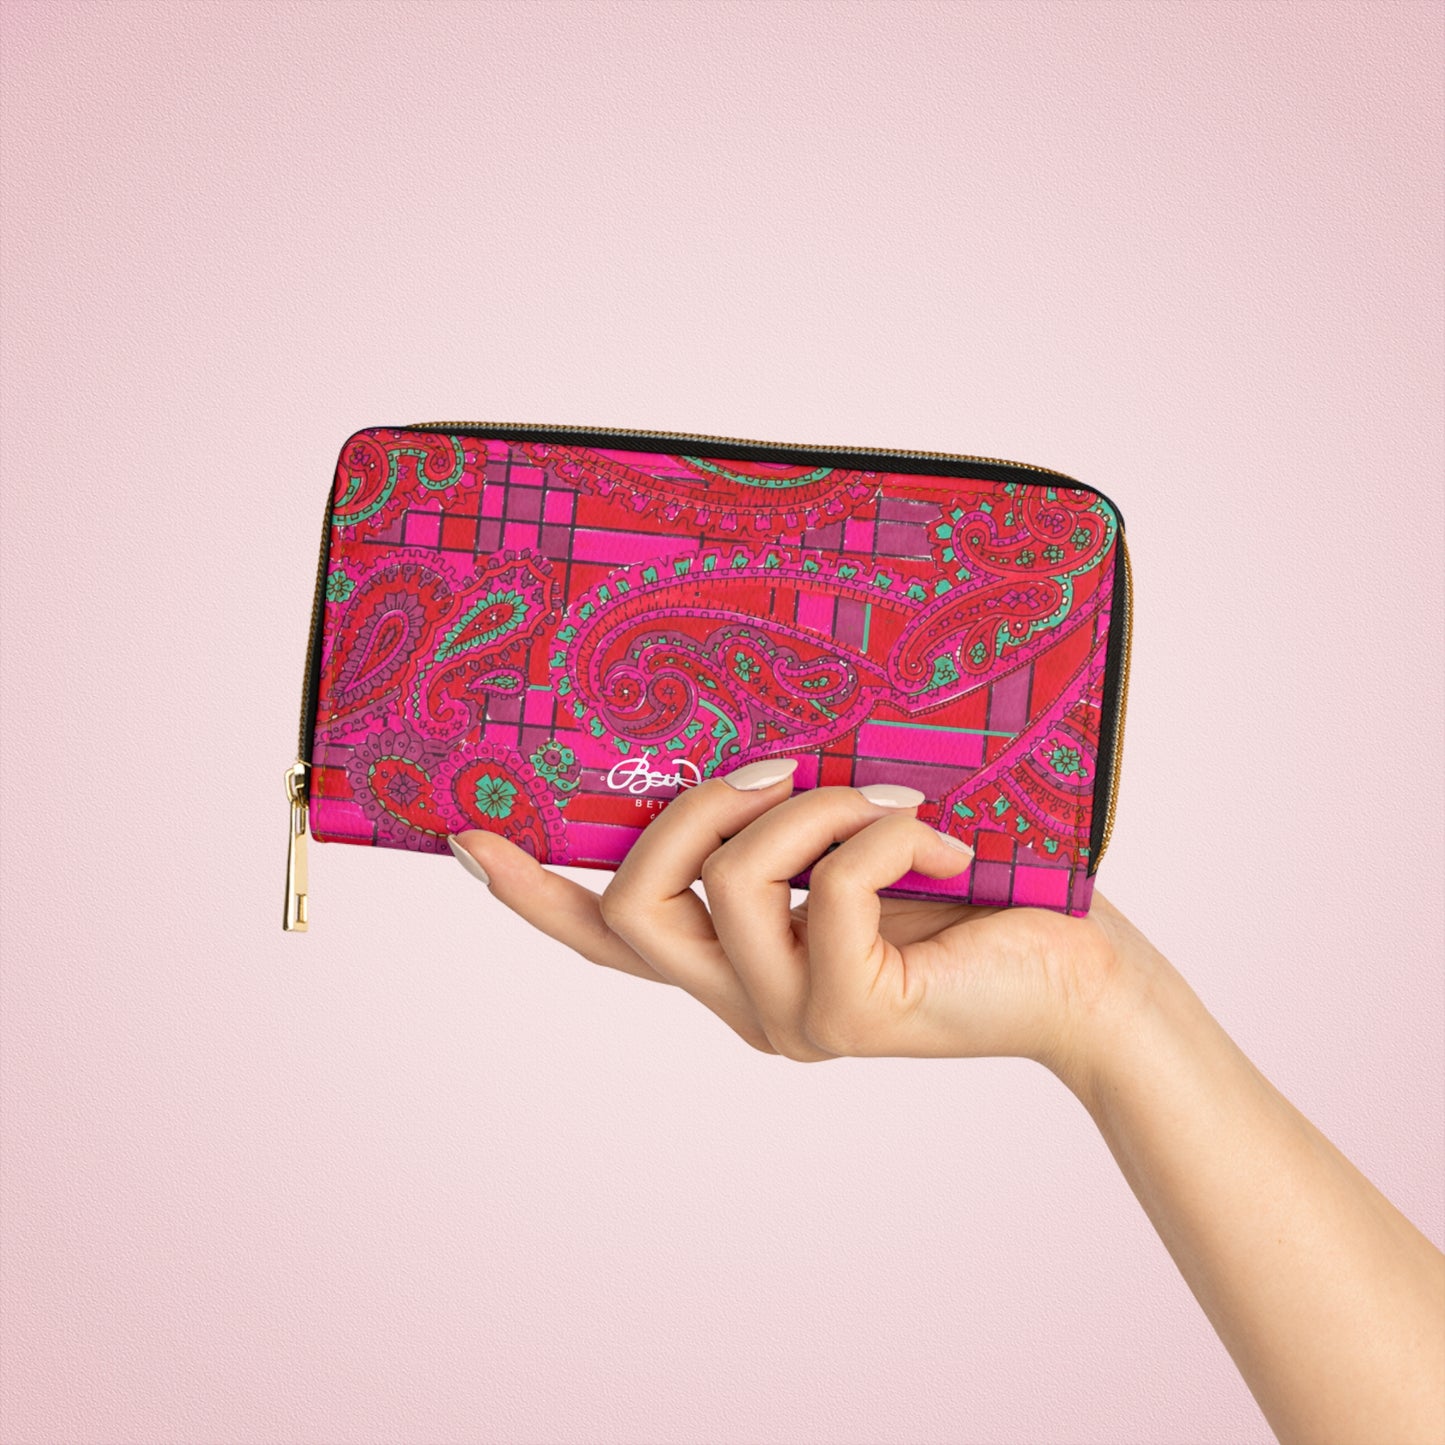 Bright Fuscia and Red Poppy Paisley on Plaid Zipper Wallet